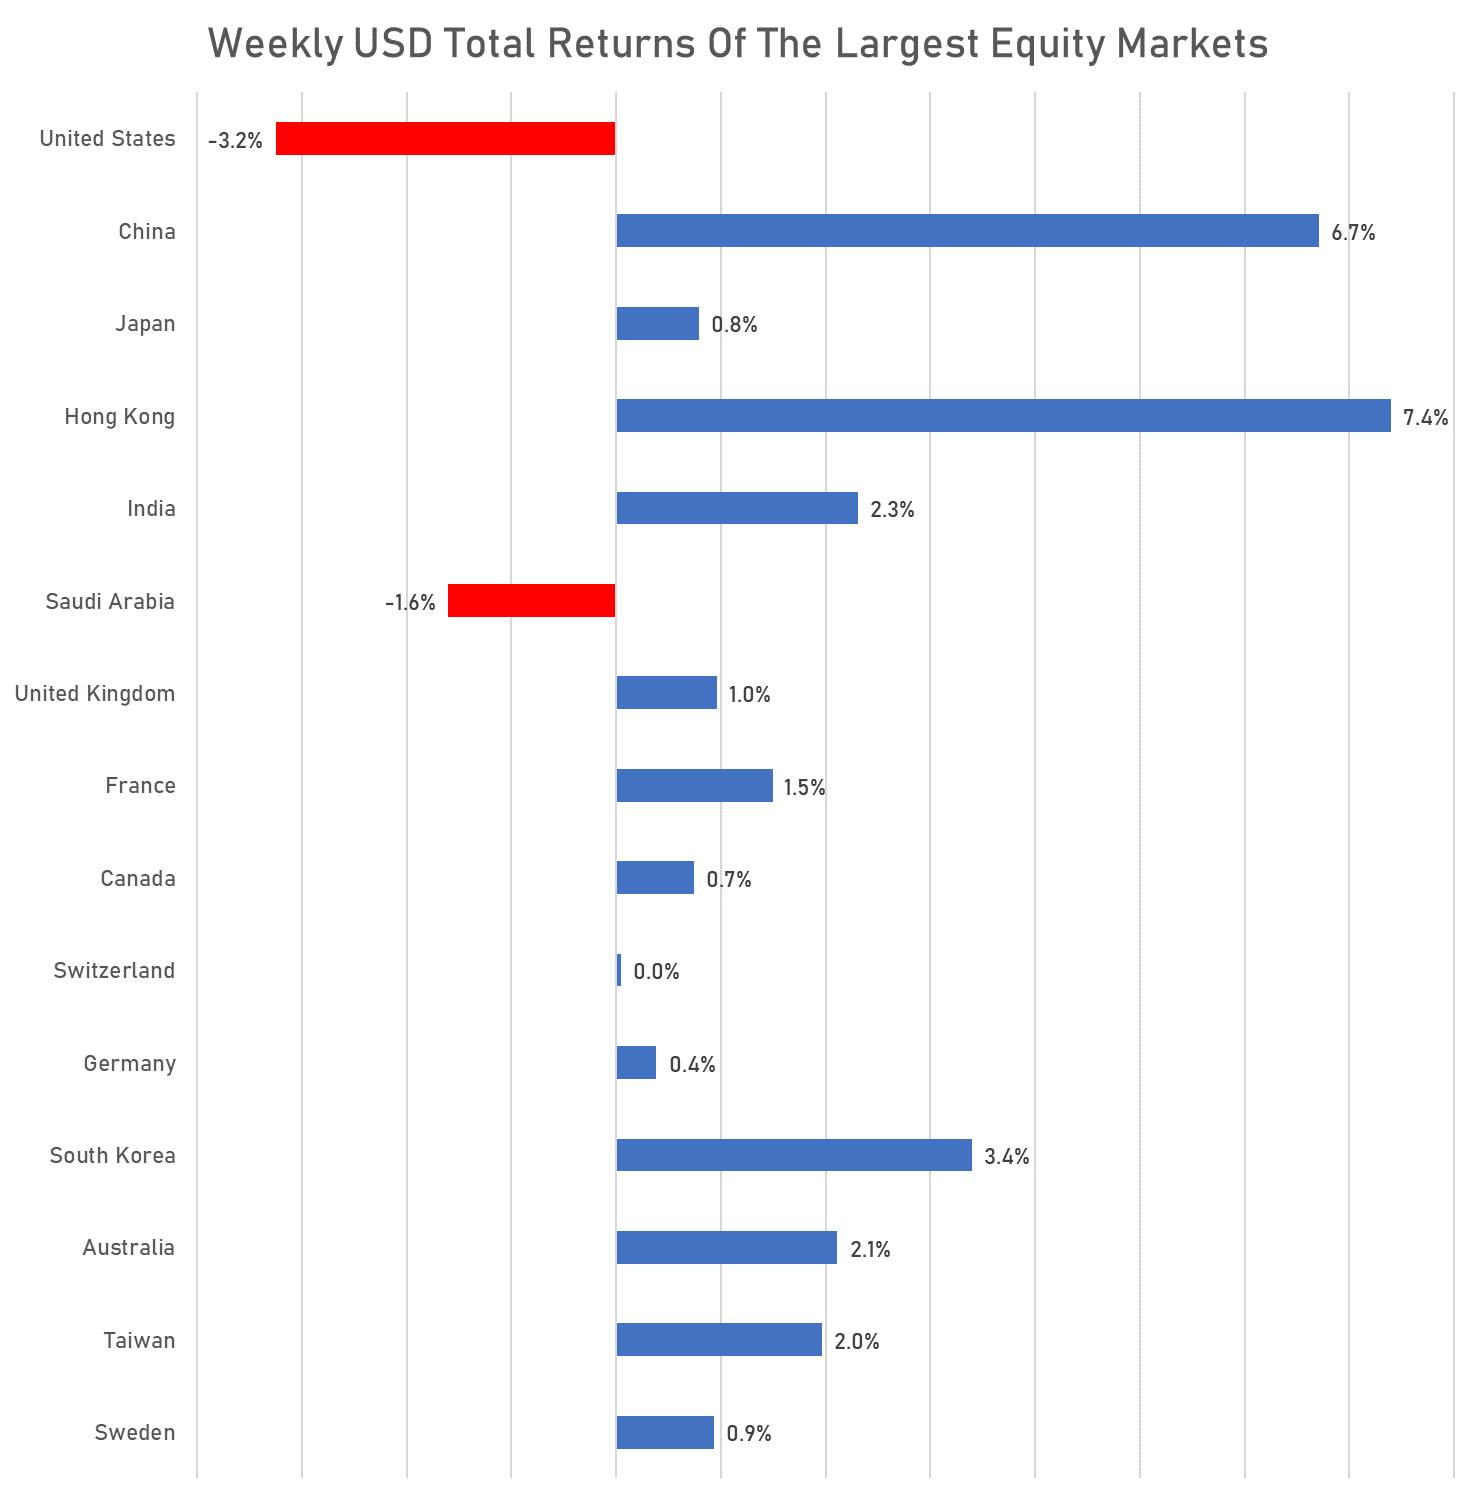 Weekly USD Total Returns Of Major Equity Markets | Sources: phipost.com, FactSet data 